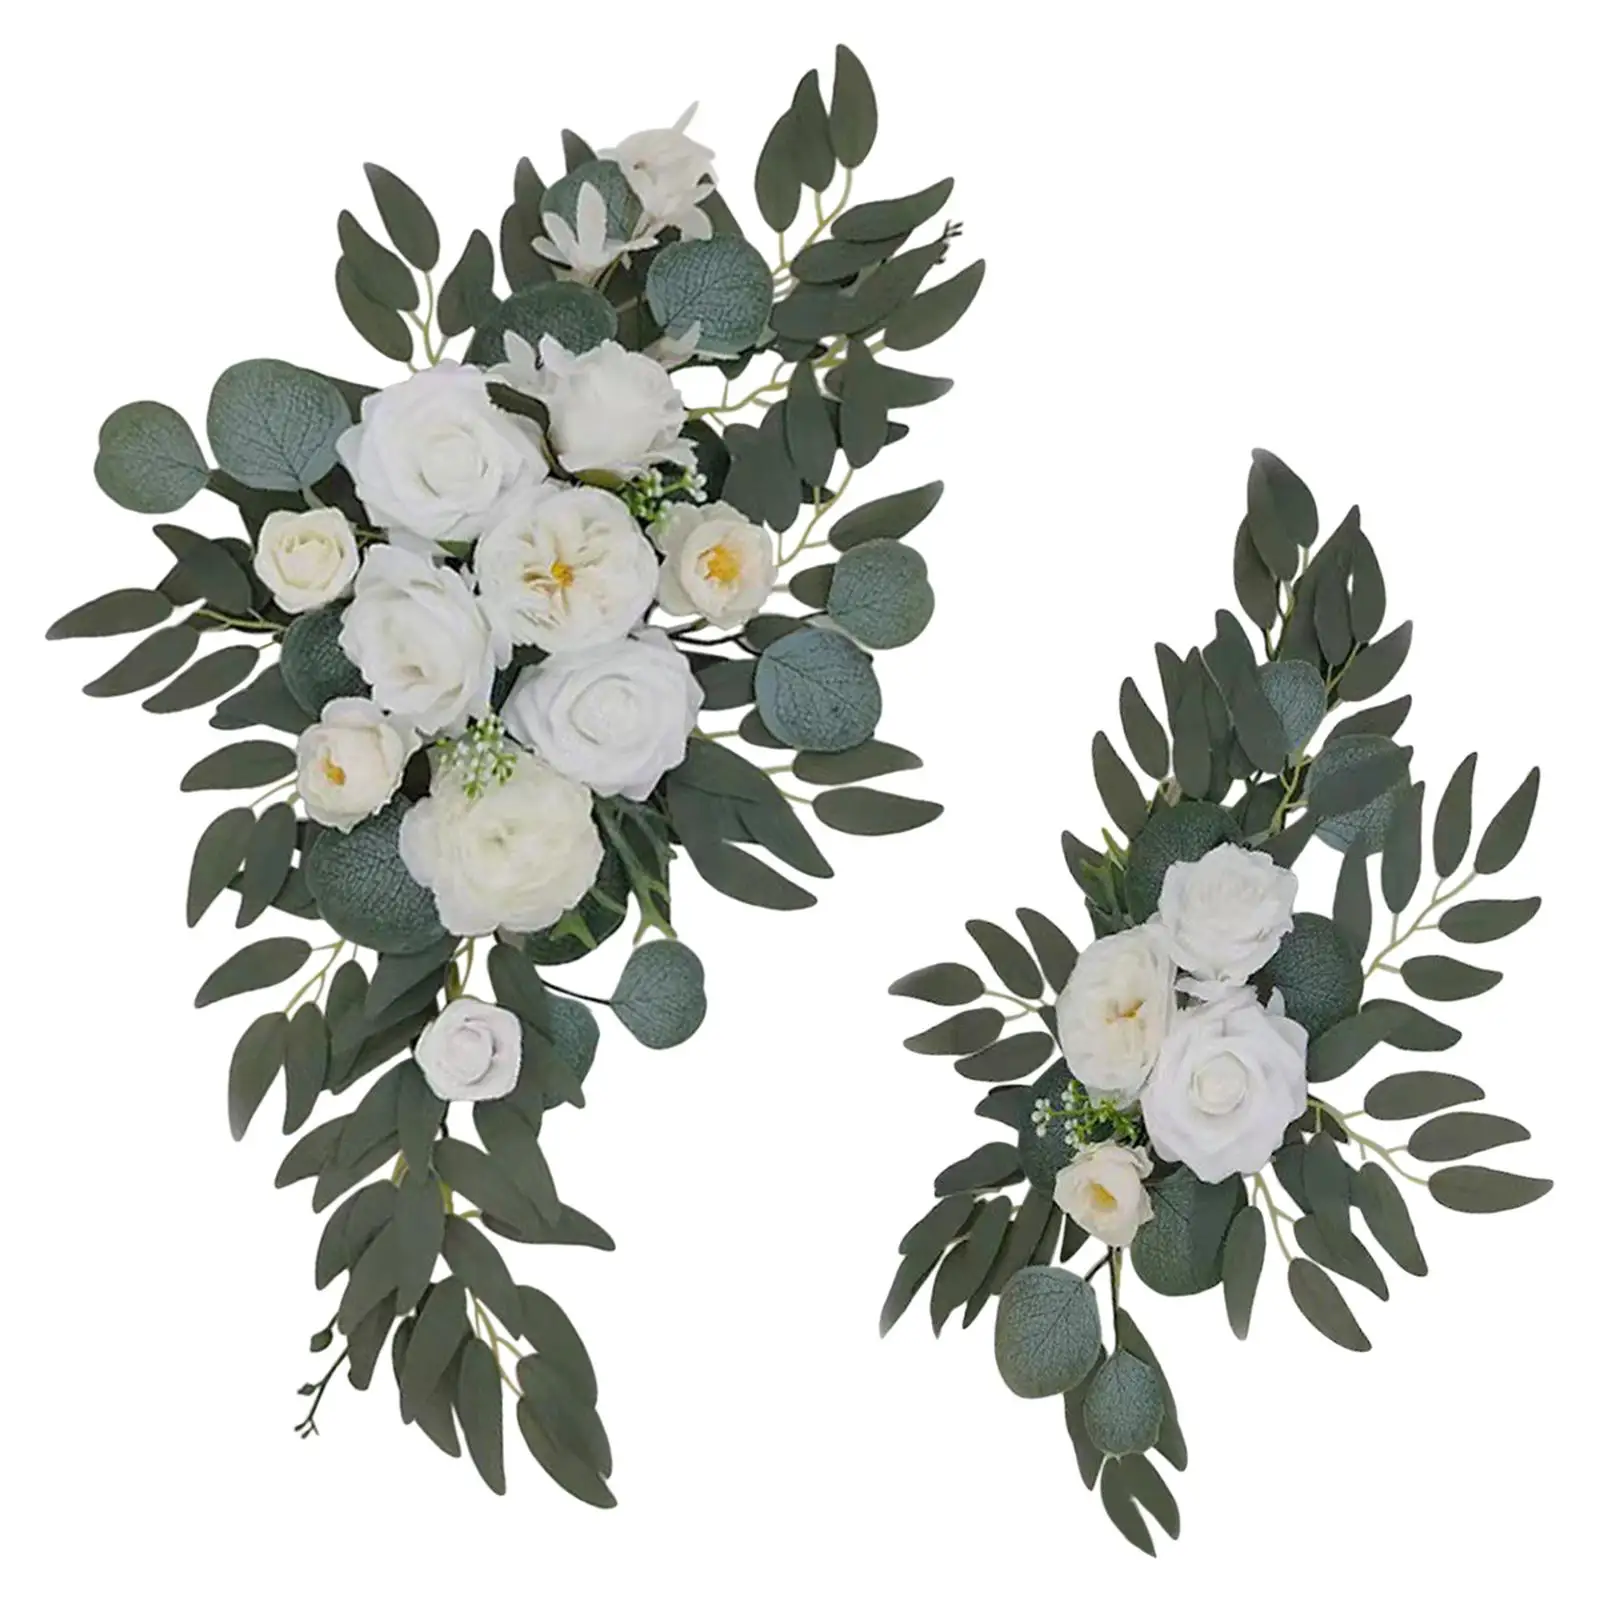 2 Pieces Artificial Wedding Arch Flowers White Flowers Flower Garland Floral Decoration Wedding Welcome Signs for Reception